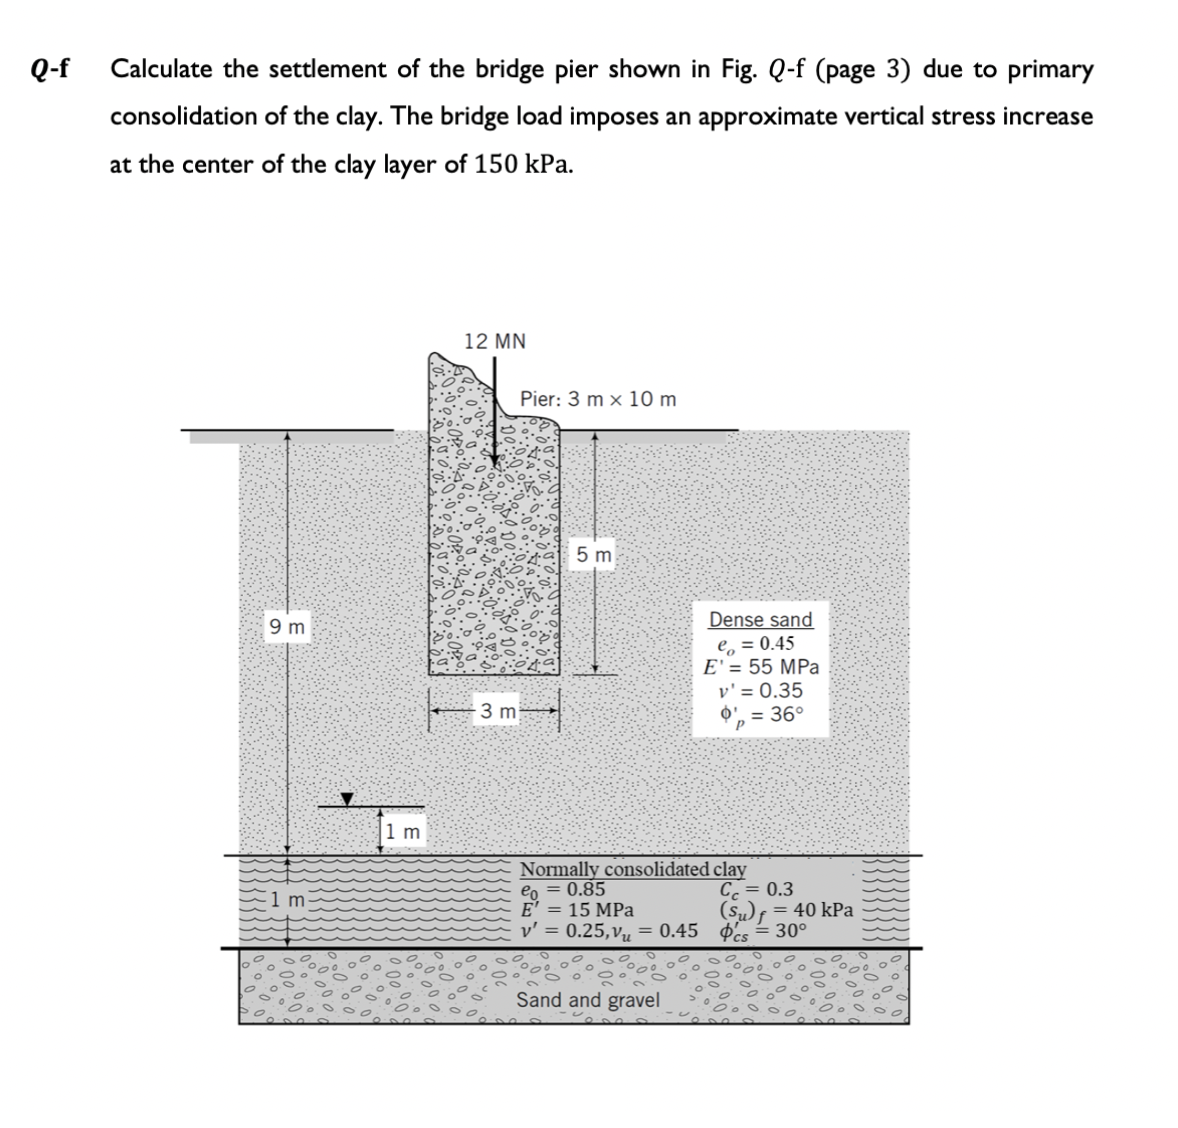 Q-f
Calculate the settlement of the bridge pier shown in Fig. Q-f (page 3) due to primary
consolidation of the clay. The bridge load imposes an approximate vertical stress increase
at the center of the clay layer of 150 kPa.
9 m
1 m
1 m
12 MN
Pier: 3 m x 10 m
3 m
5 m
Dense sand
e = 0.45
E' = 55 MPa
v' = 0.35
$' = 36°
Normally consolidated clay
eo = 0.85
E' = 15 MPa
Sand and gravel
Cc = 0.3
(su) f = 40 kPa
v' = 0.25, vμ = 0.45 c = 30°